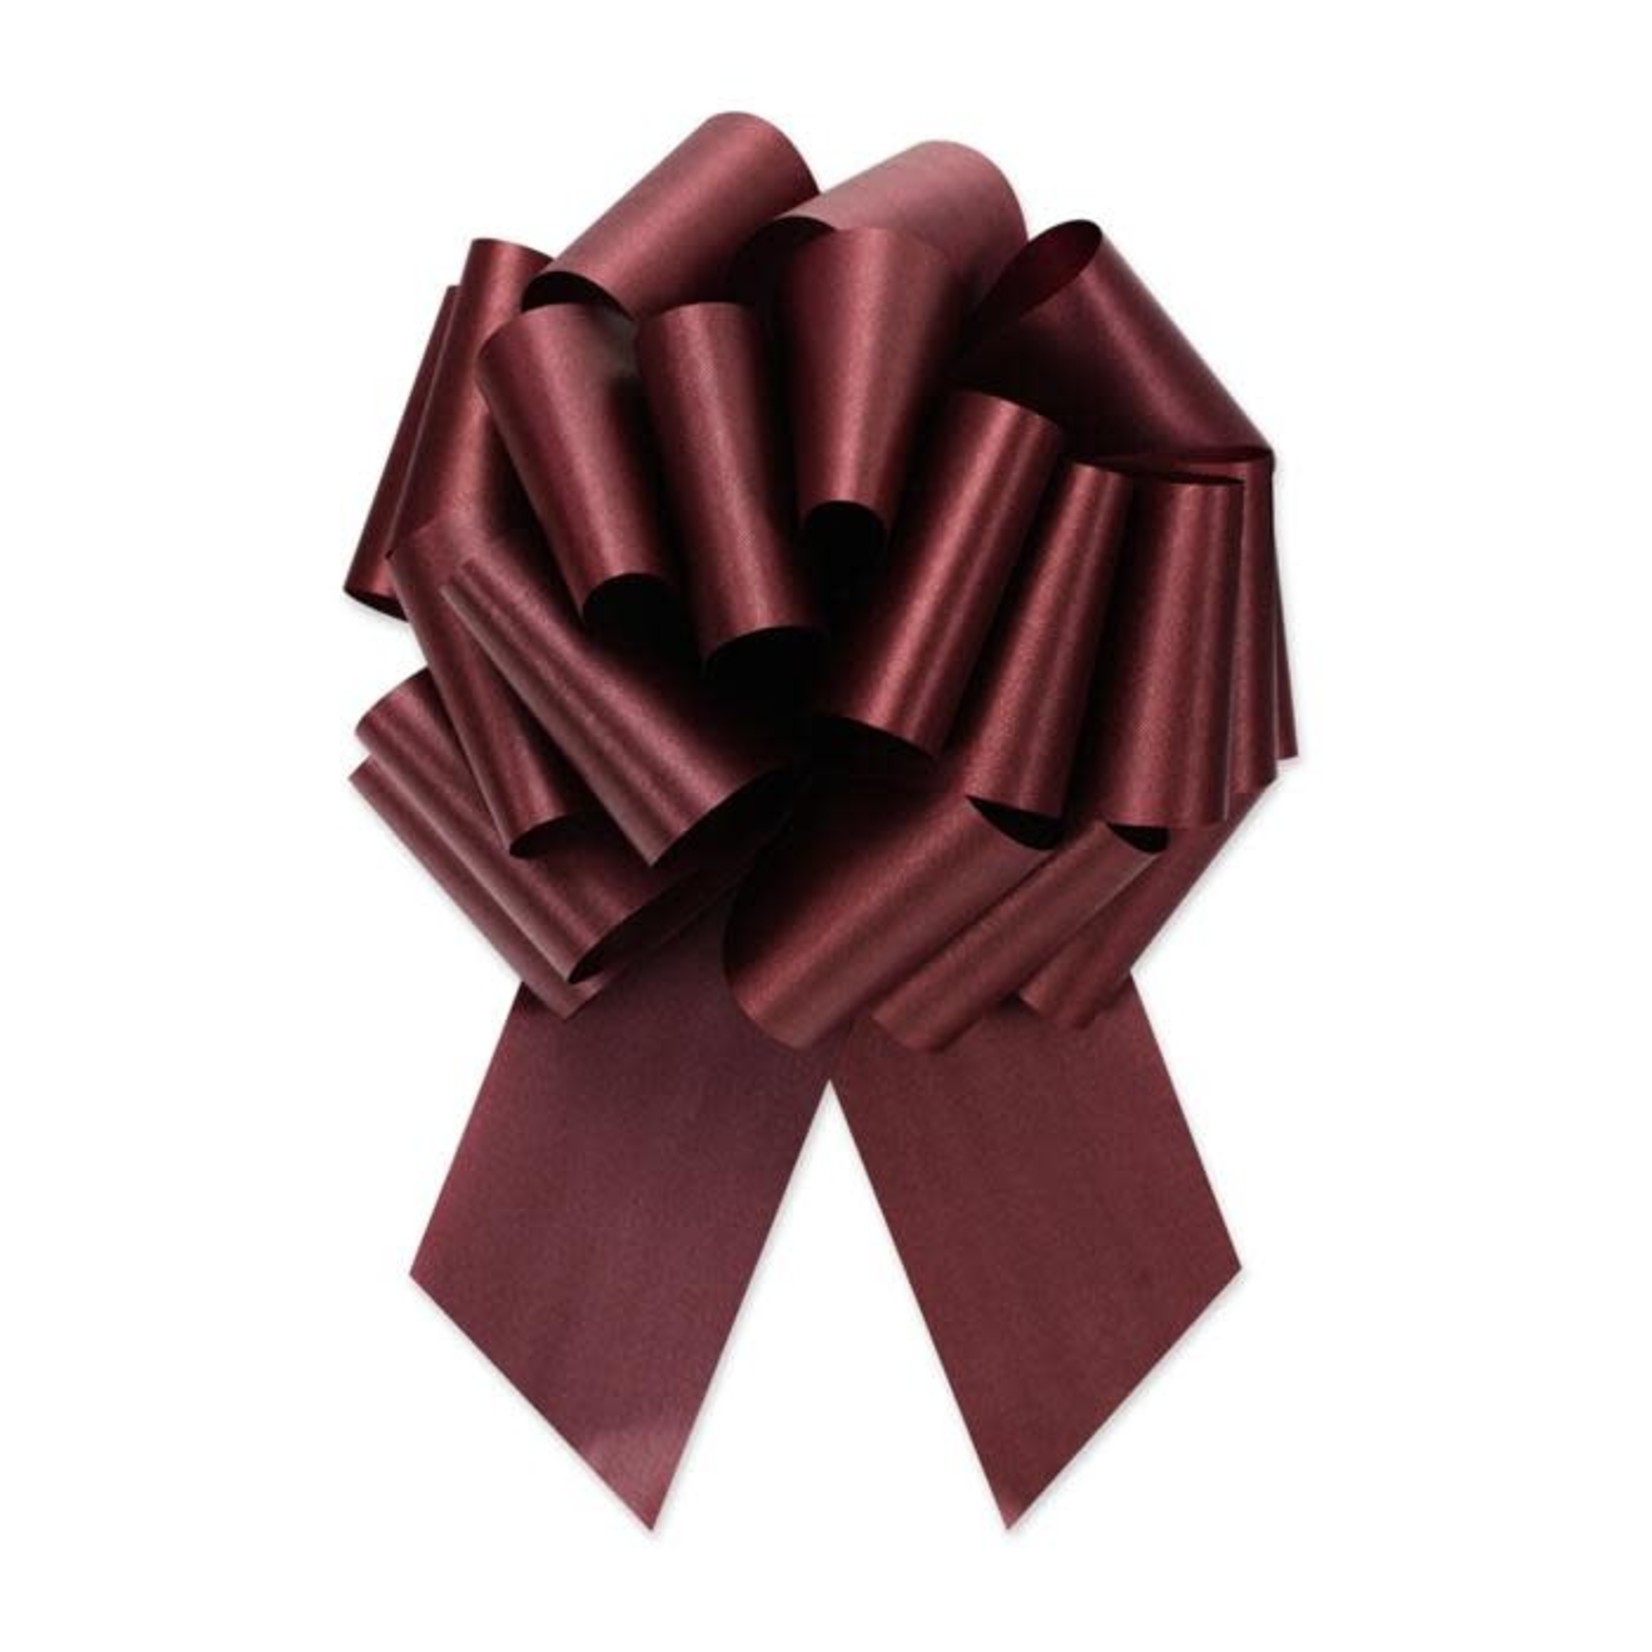 PERFECT BOW  #9 BURGUNDY, 1.5” ribbon width, 5.5" bow size, 20 loops